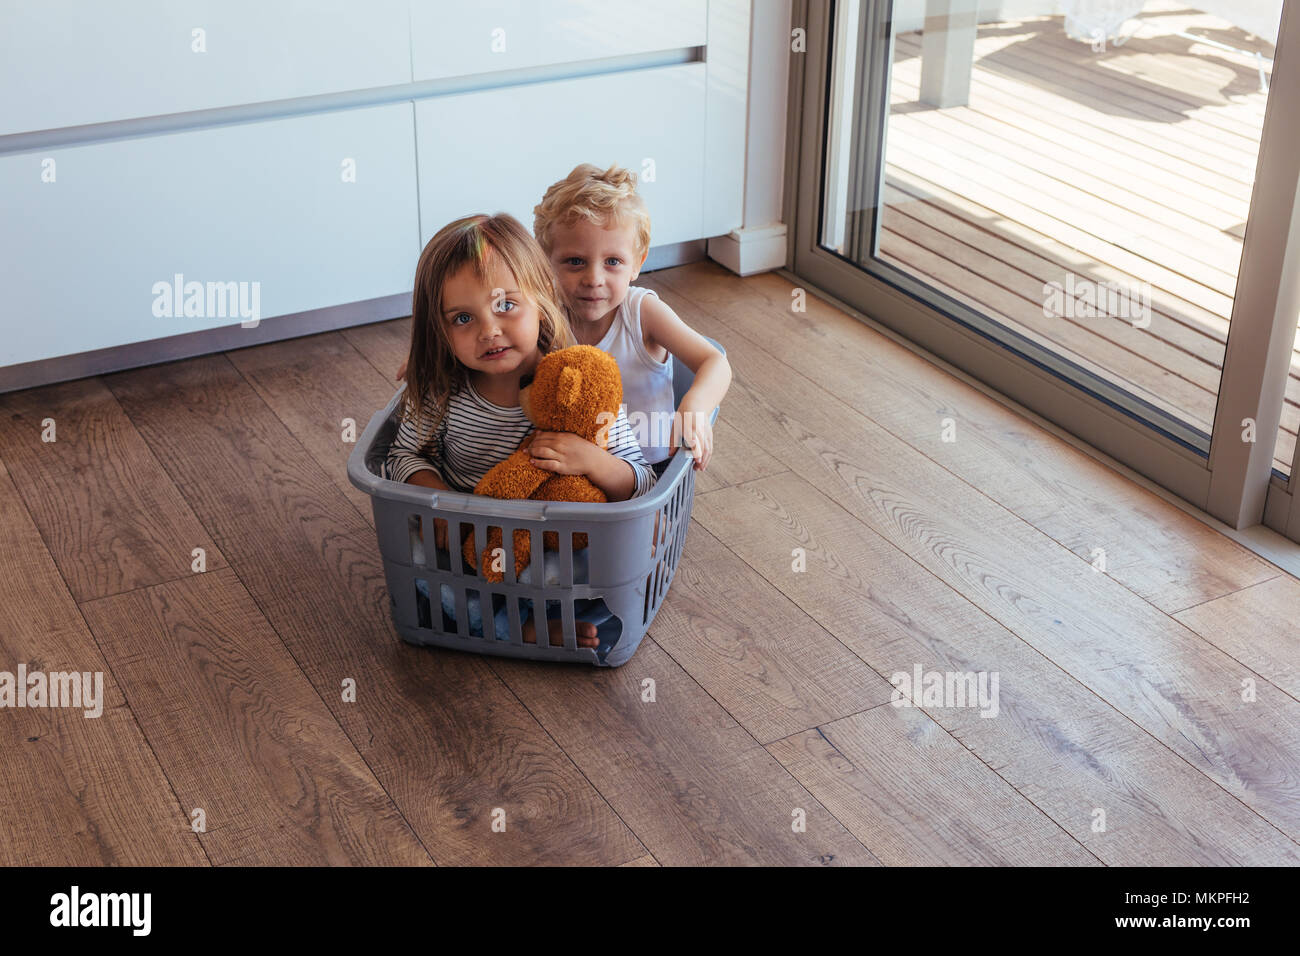 Beautiful young children sitting in a washing basket at home. Little girl holding a teddy bear and her brother playing at home. Stock Photo